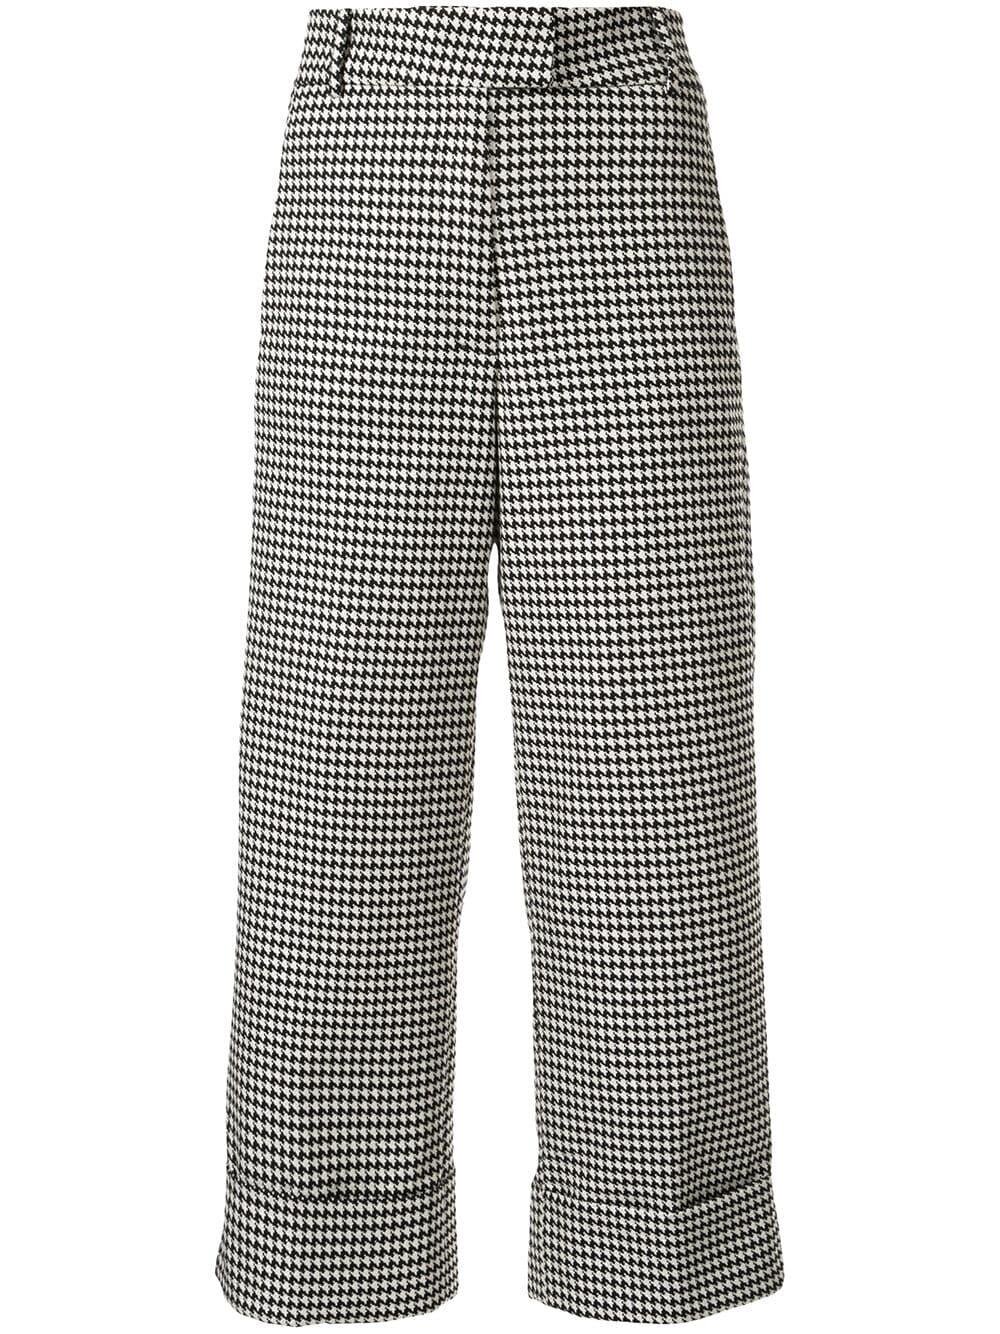 Silvia Tcherassi Garment Cropped Trousers in Black Houndstooth.jpg